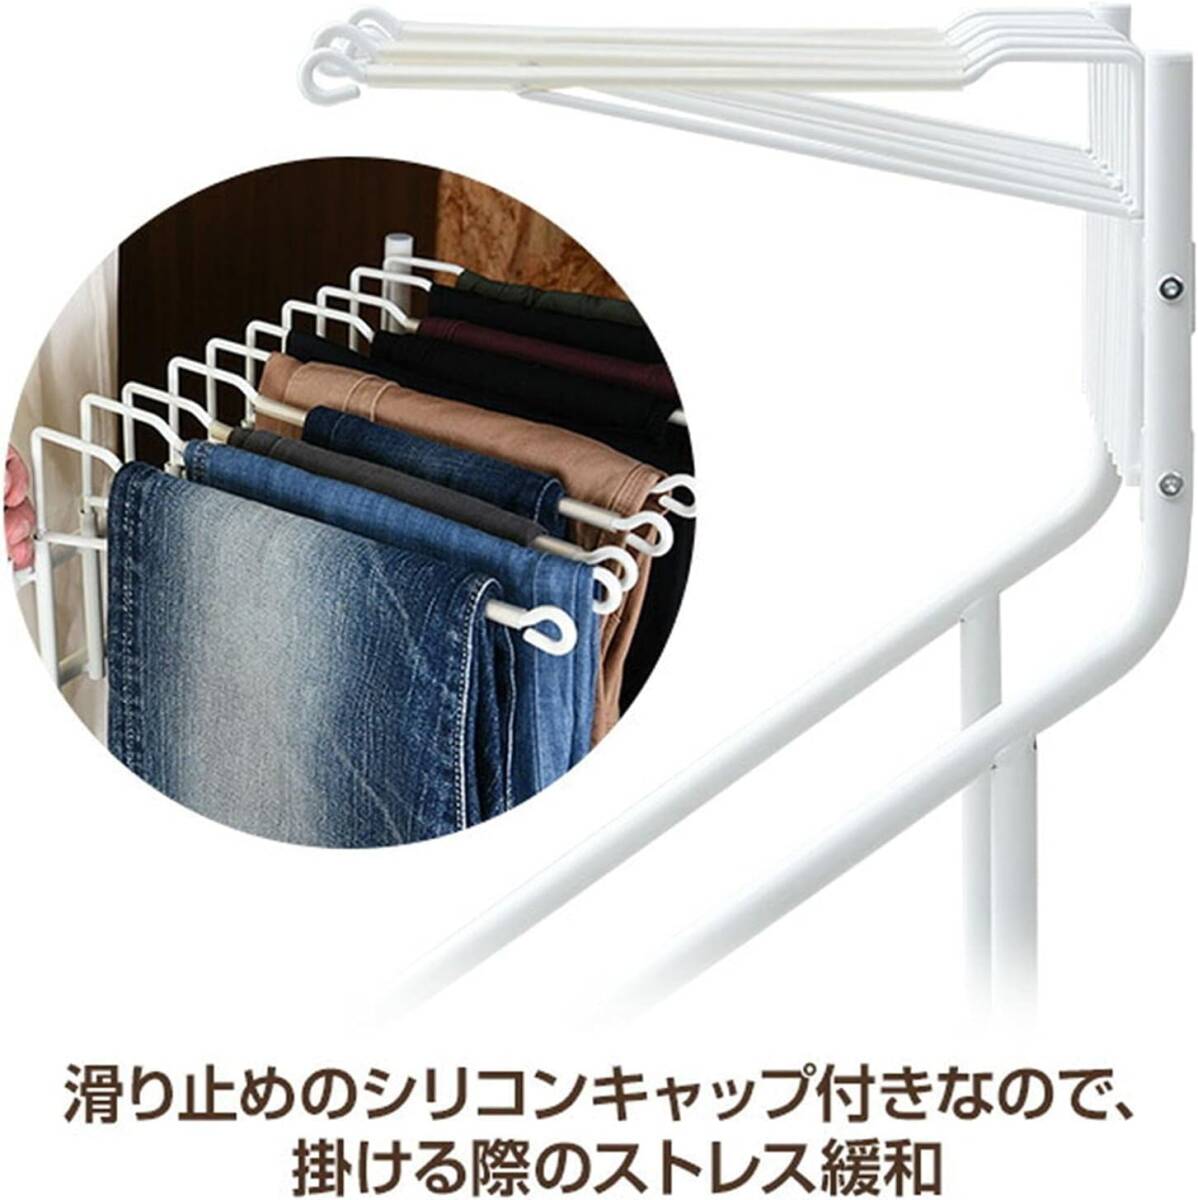 [ mountain .] slacks hanger with casters .10ps.@ taking in and out simple slipping difficult choice ... width 45.5× depth 43.5× height 66.5cmsla